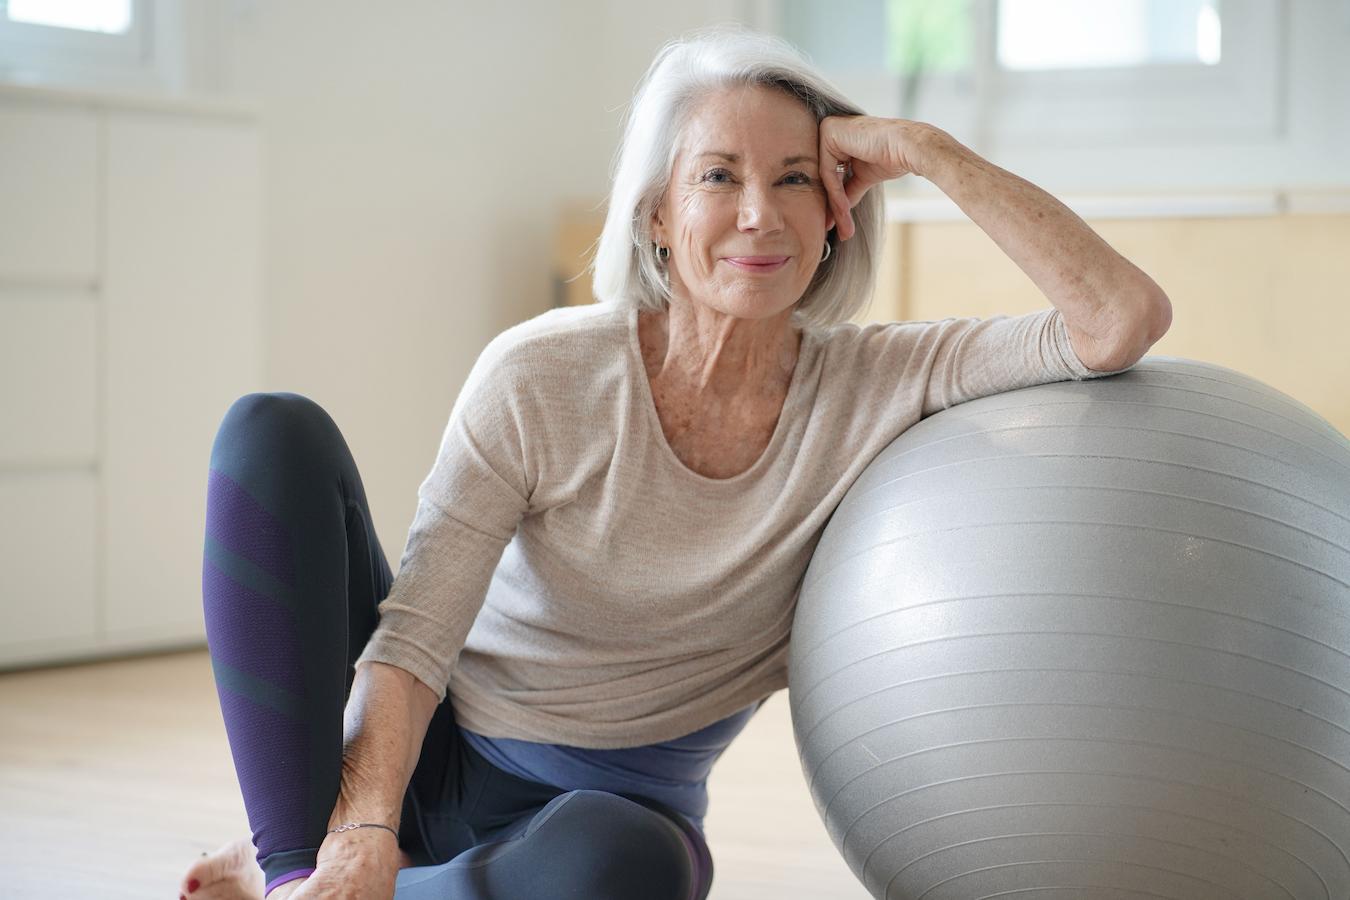 older lady smiling and leaning on a yoga ball carrier oil free radicals essential oil called hawaiian lei flowers quality products essential oil anti inflammatory